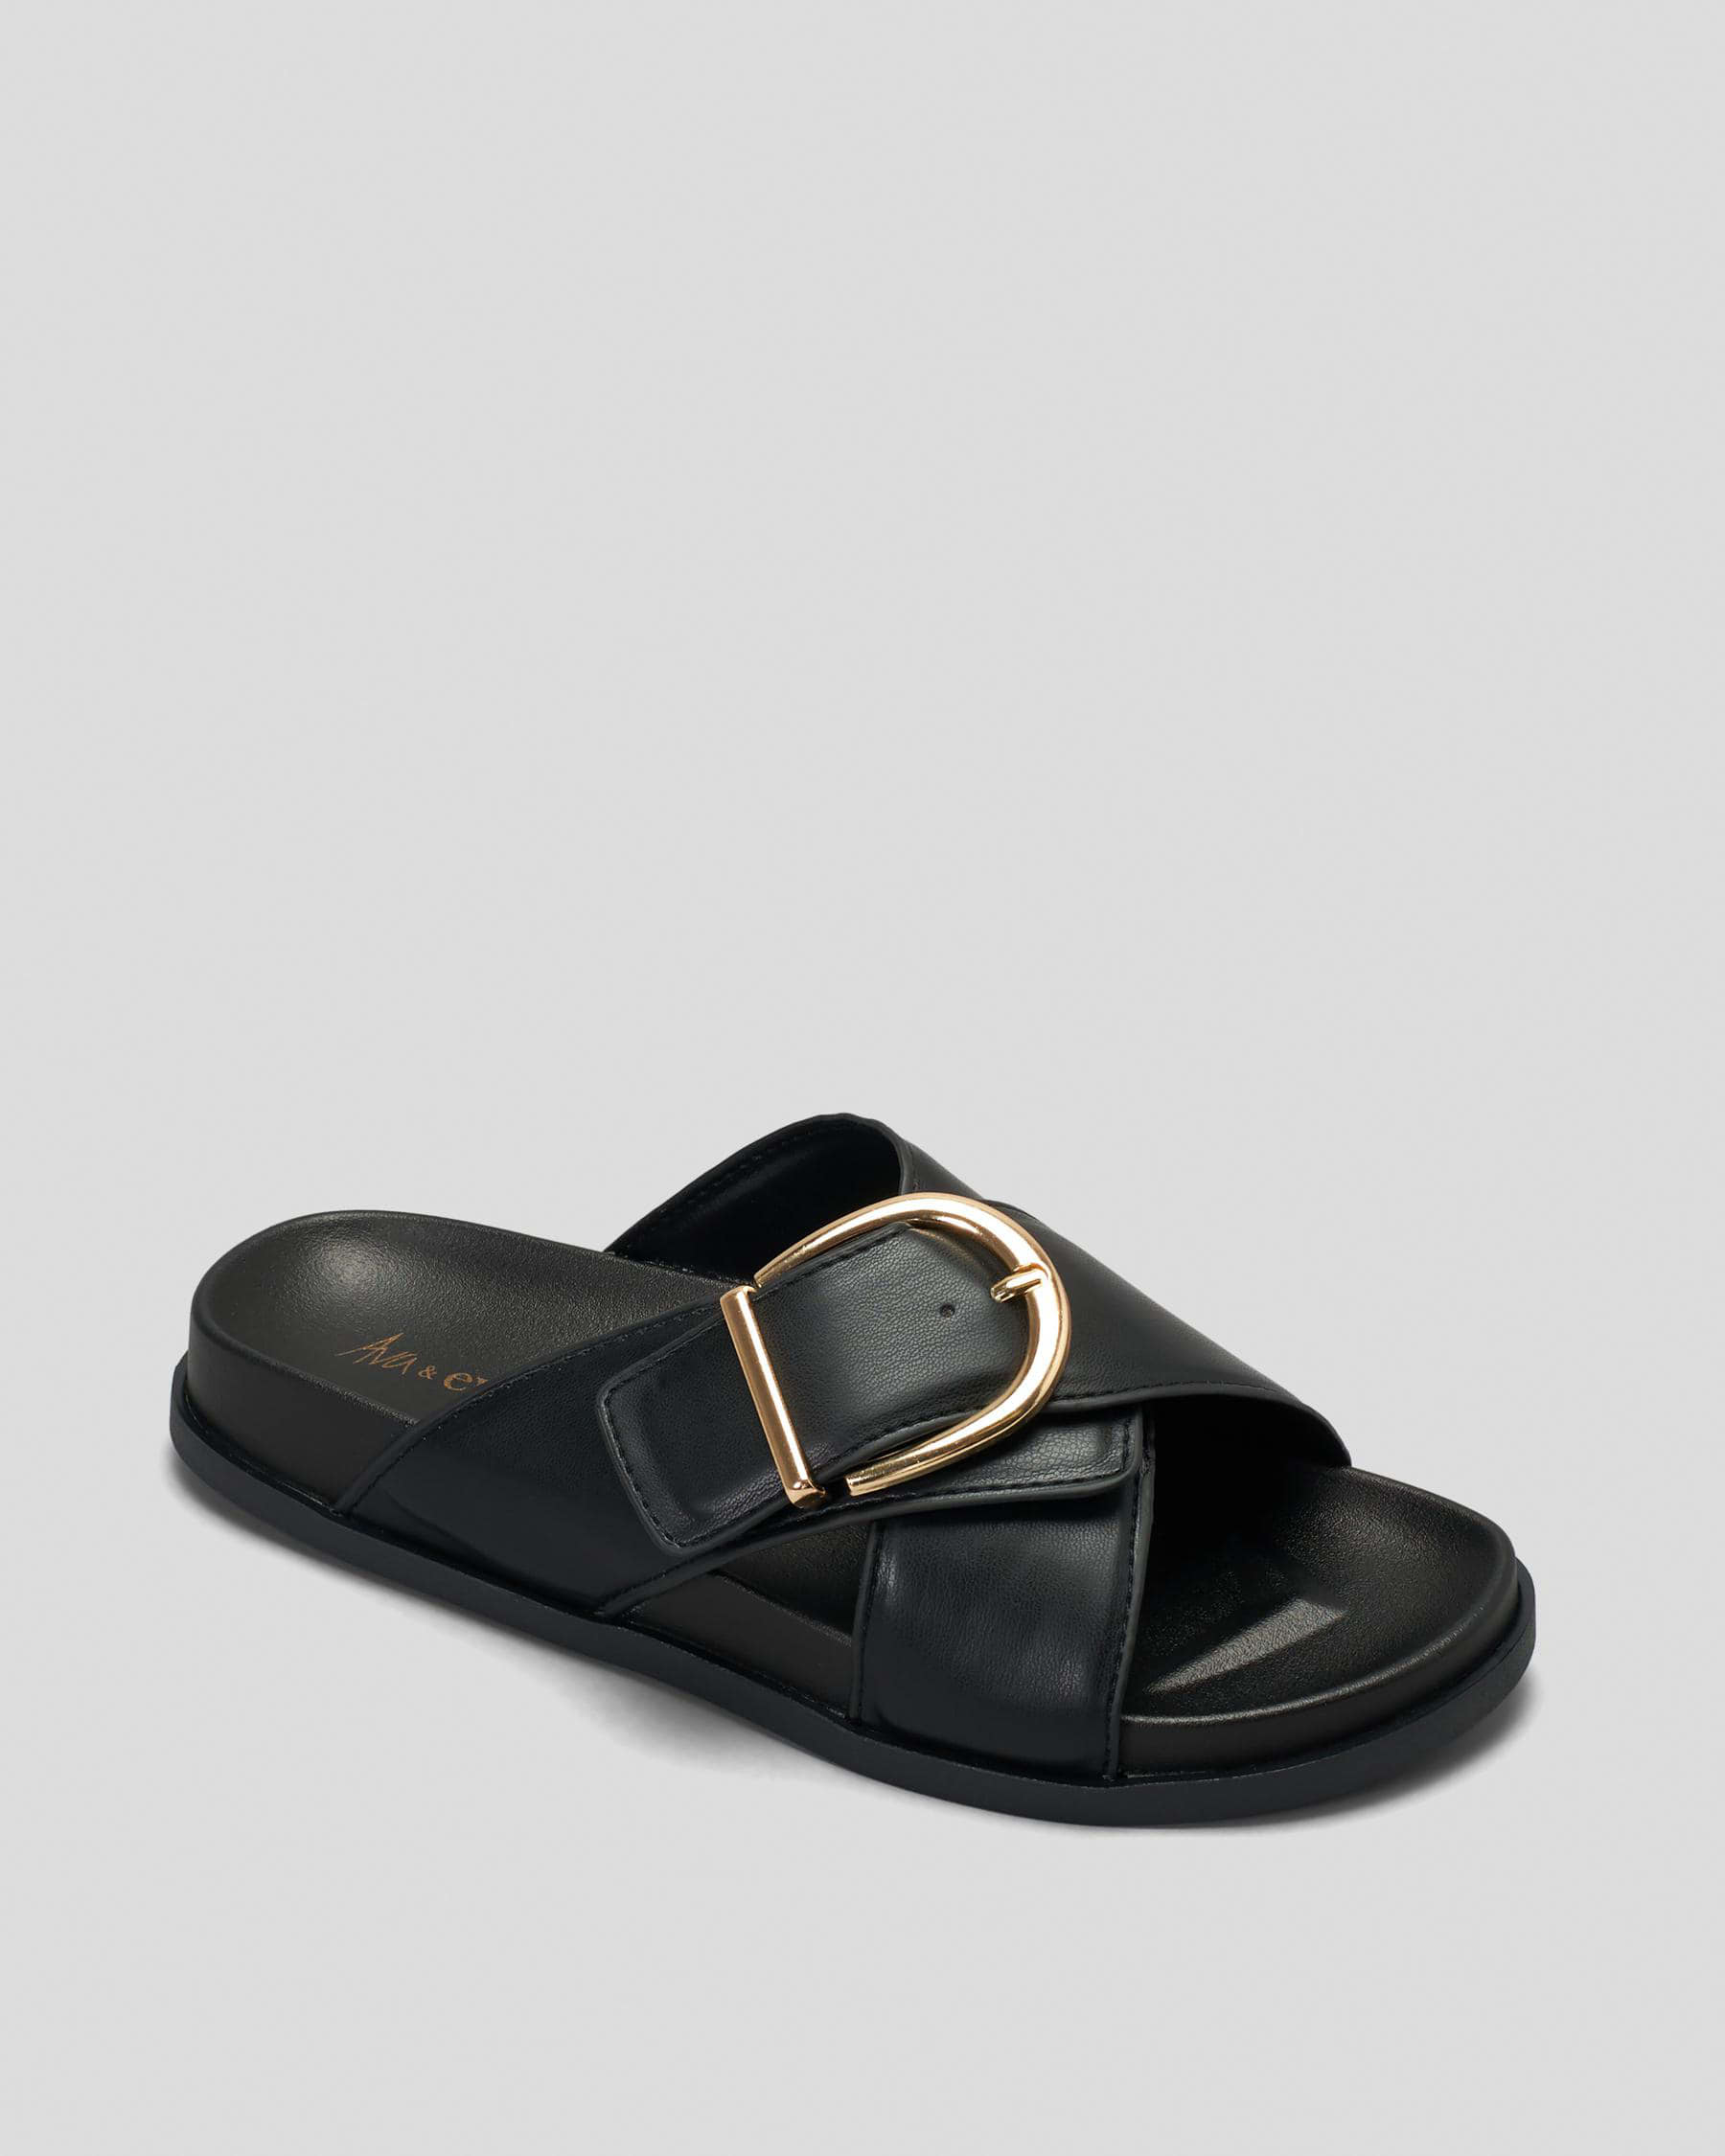 Shop Ava And Ever Prague Slide Sandals In Black - Fast Shipping & Easy ...